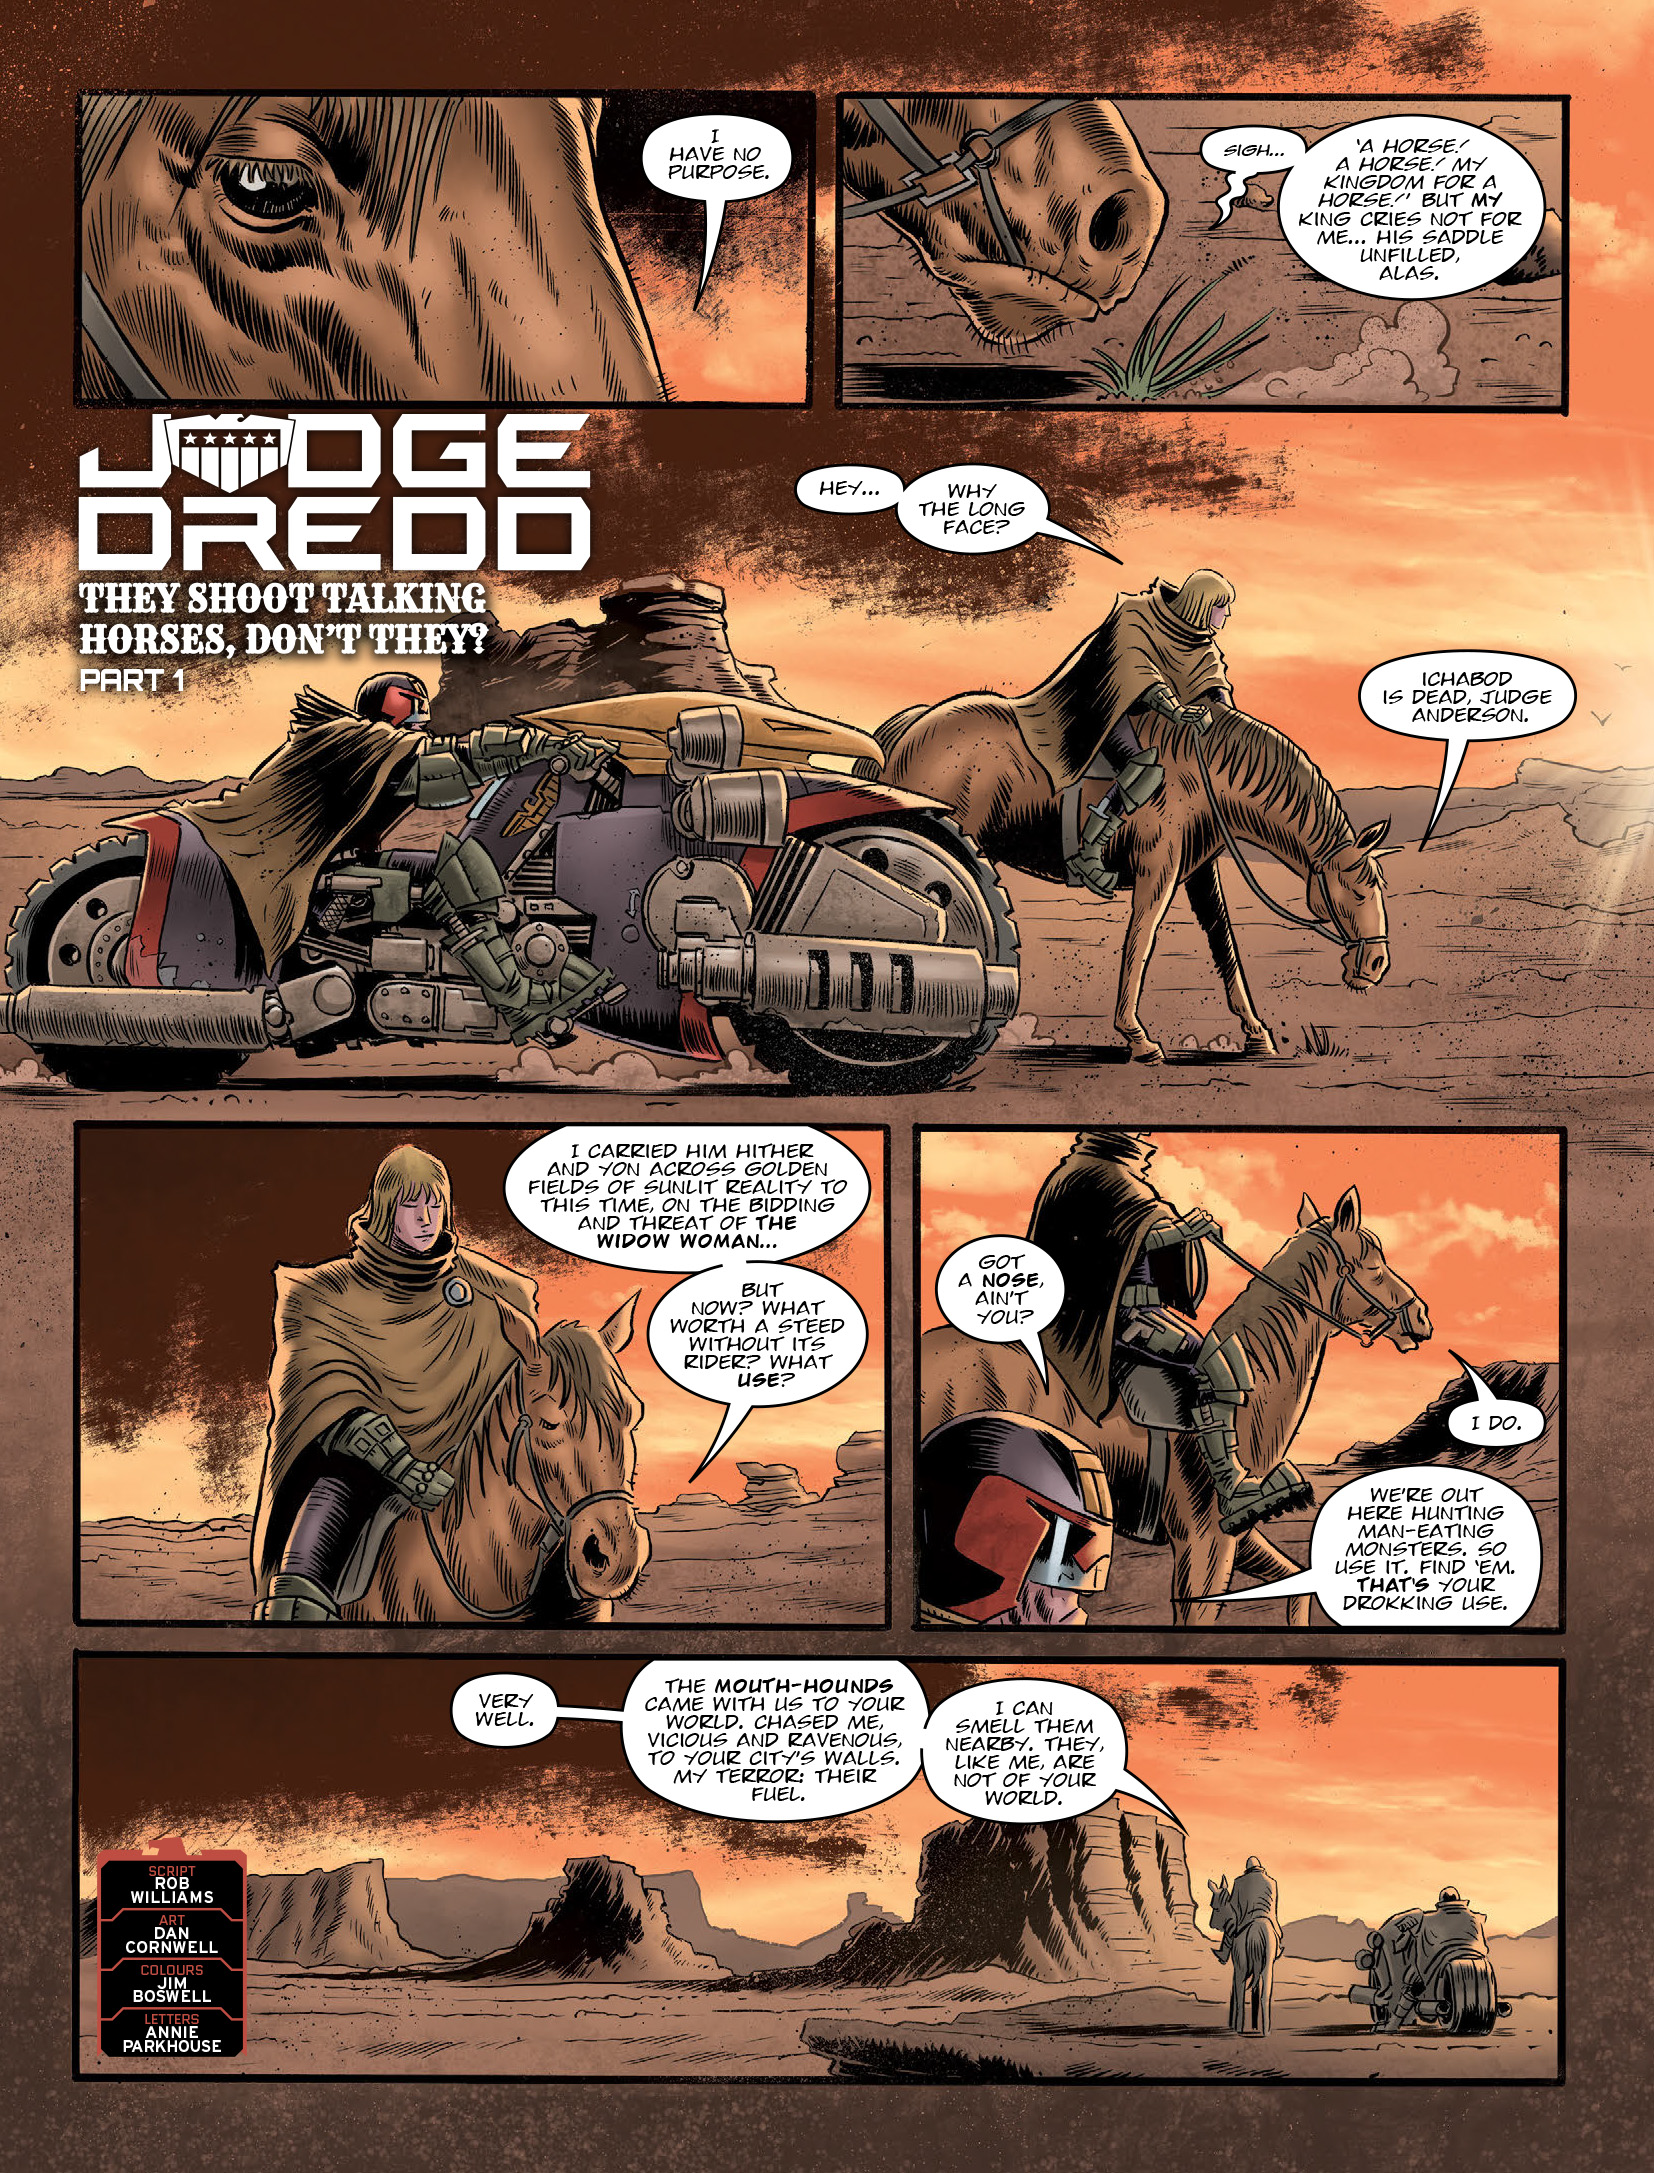 2000 AD: Chapter 2204 - Page 3